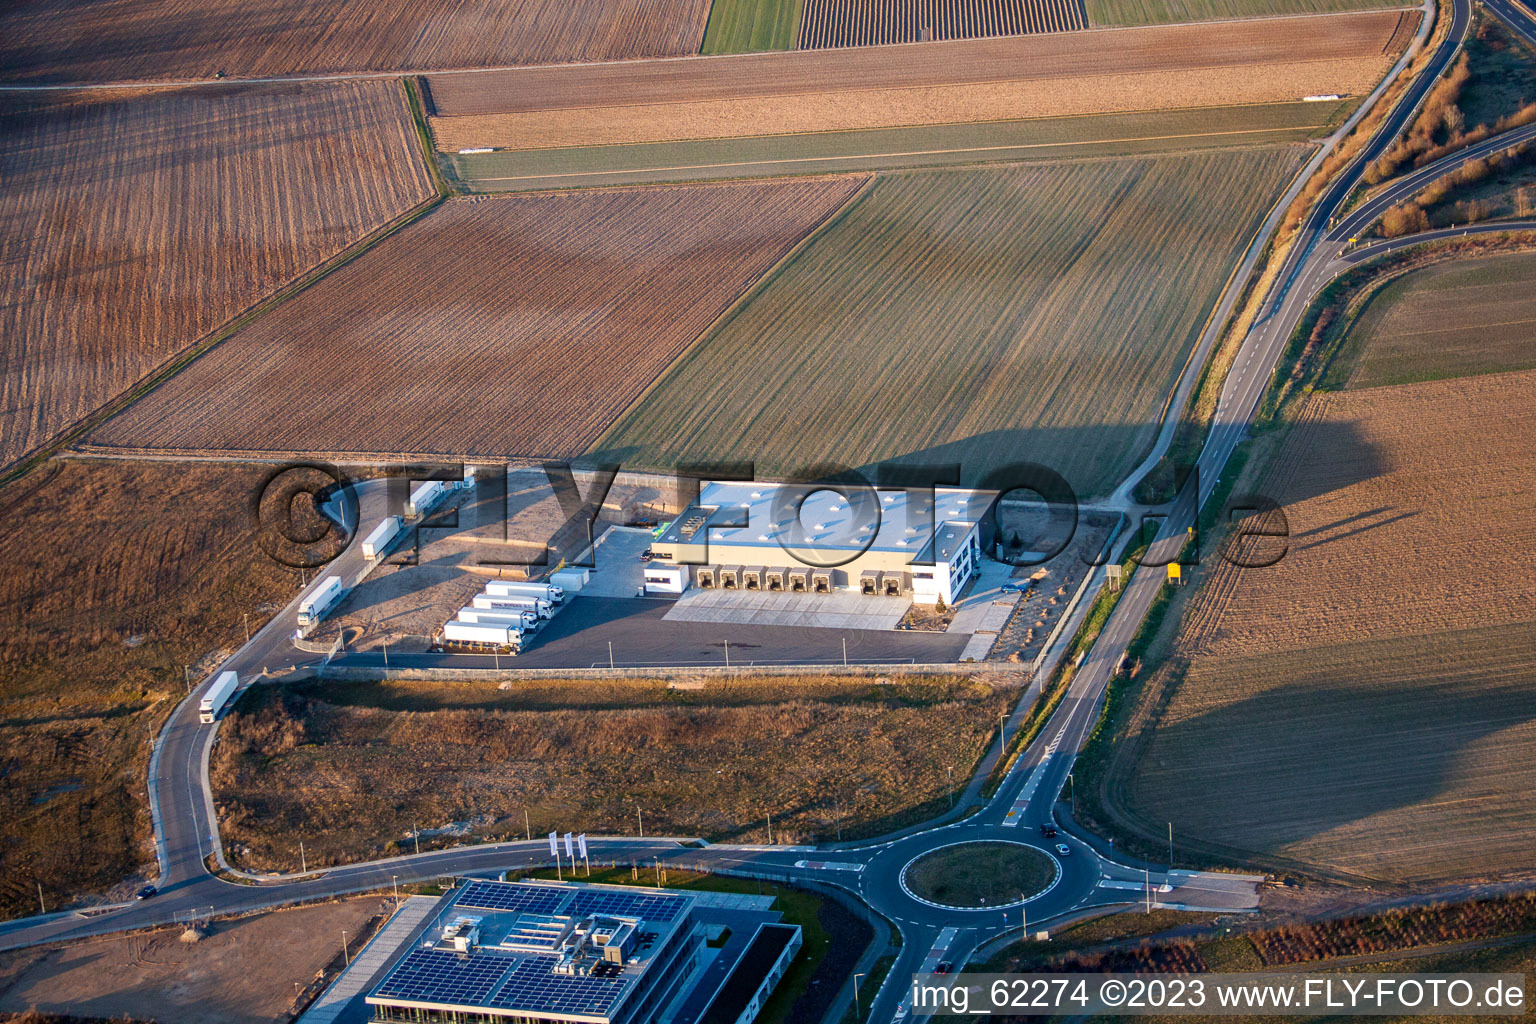 North industrial area in Rülzheim in the state Rhineland-Palatinate, Germany seen from above